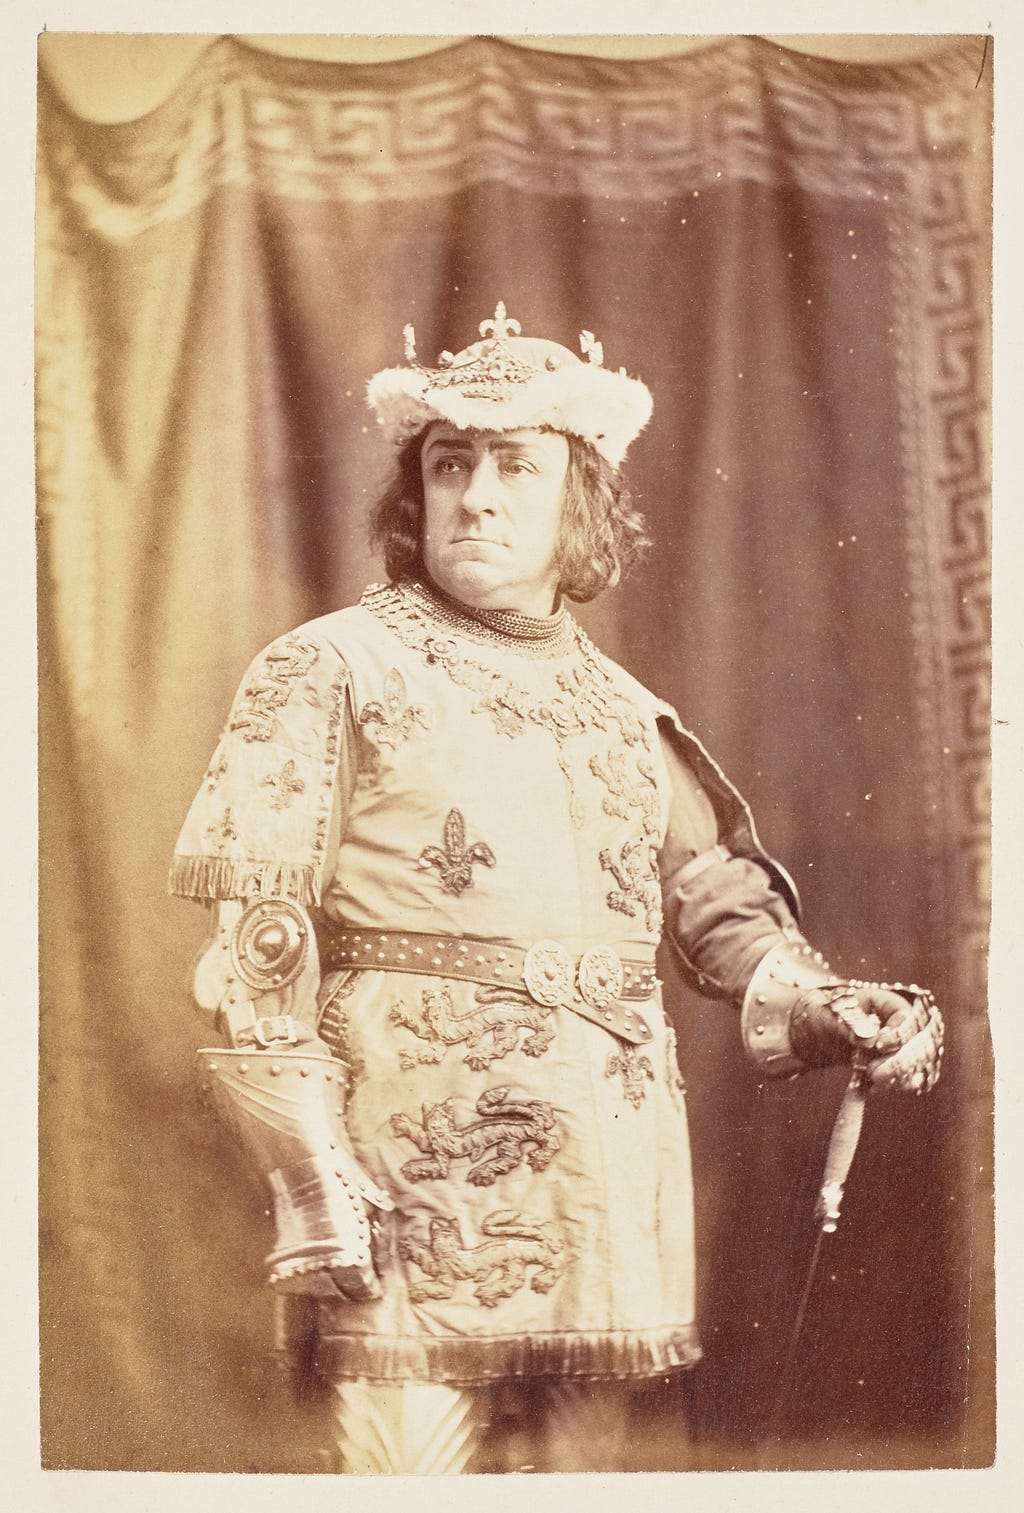 Black and white photo. Man in rich 15th-century dress. Belted tunic decorated with fleur de lys and lions, hat and gauntlets.